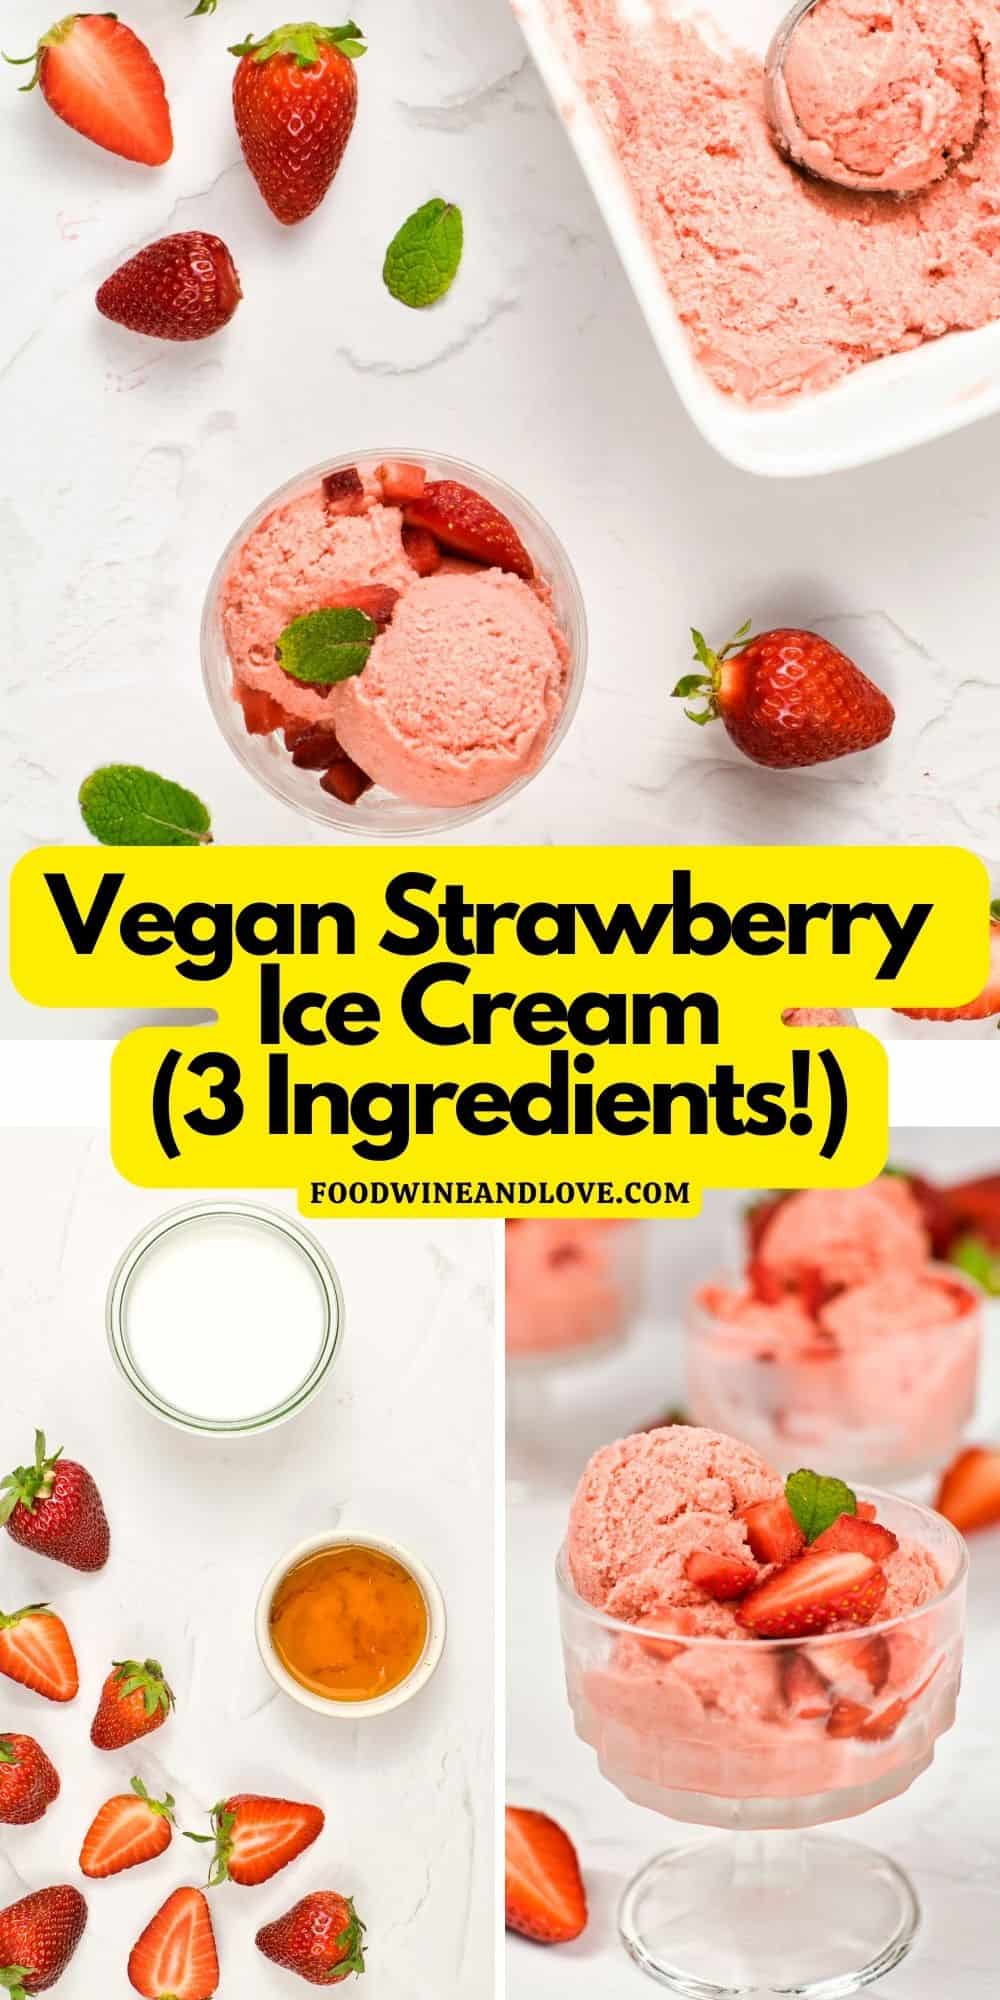 3 Ingredient Vegan Strawberry Ice Cream, a simple and delicious recipe that can be made in minutes. With and without coconut.